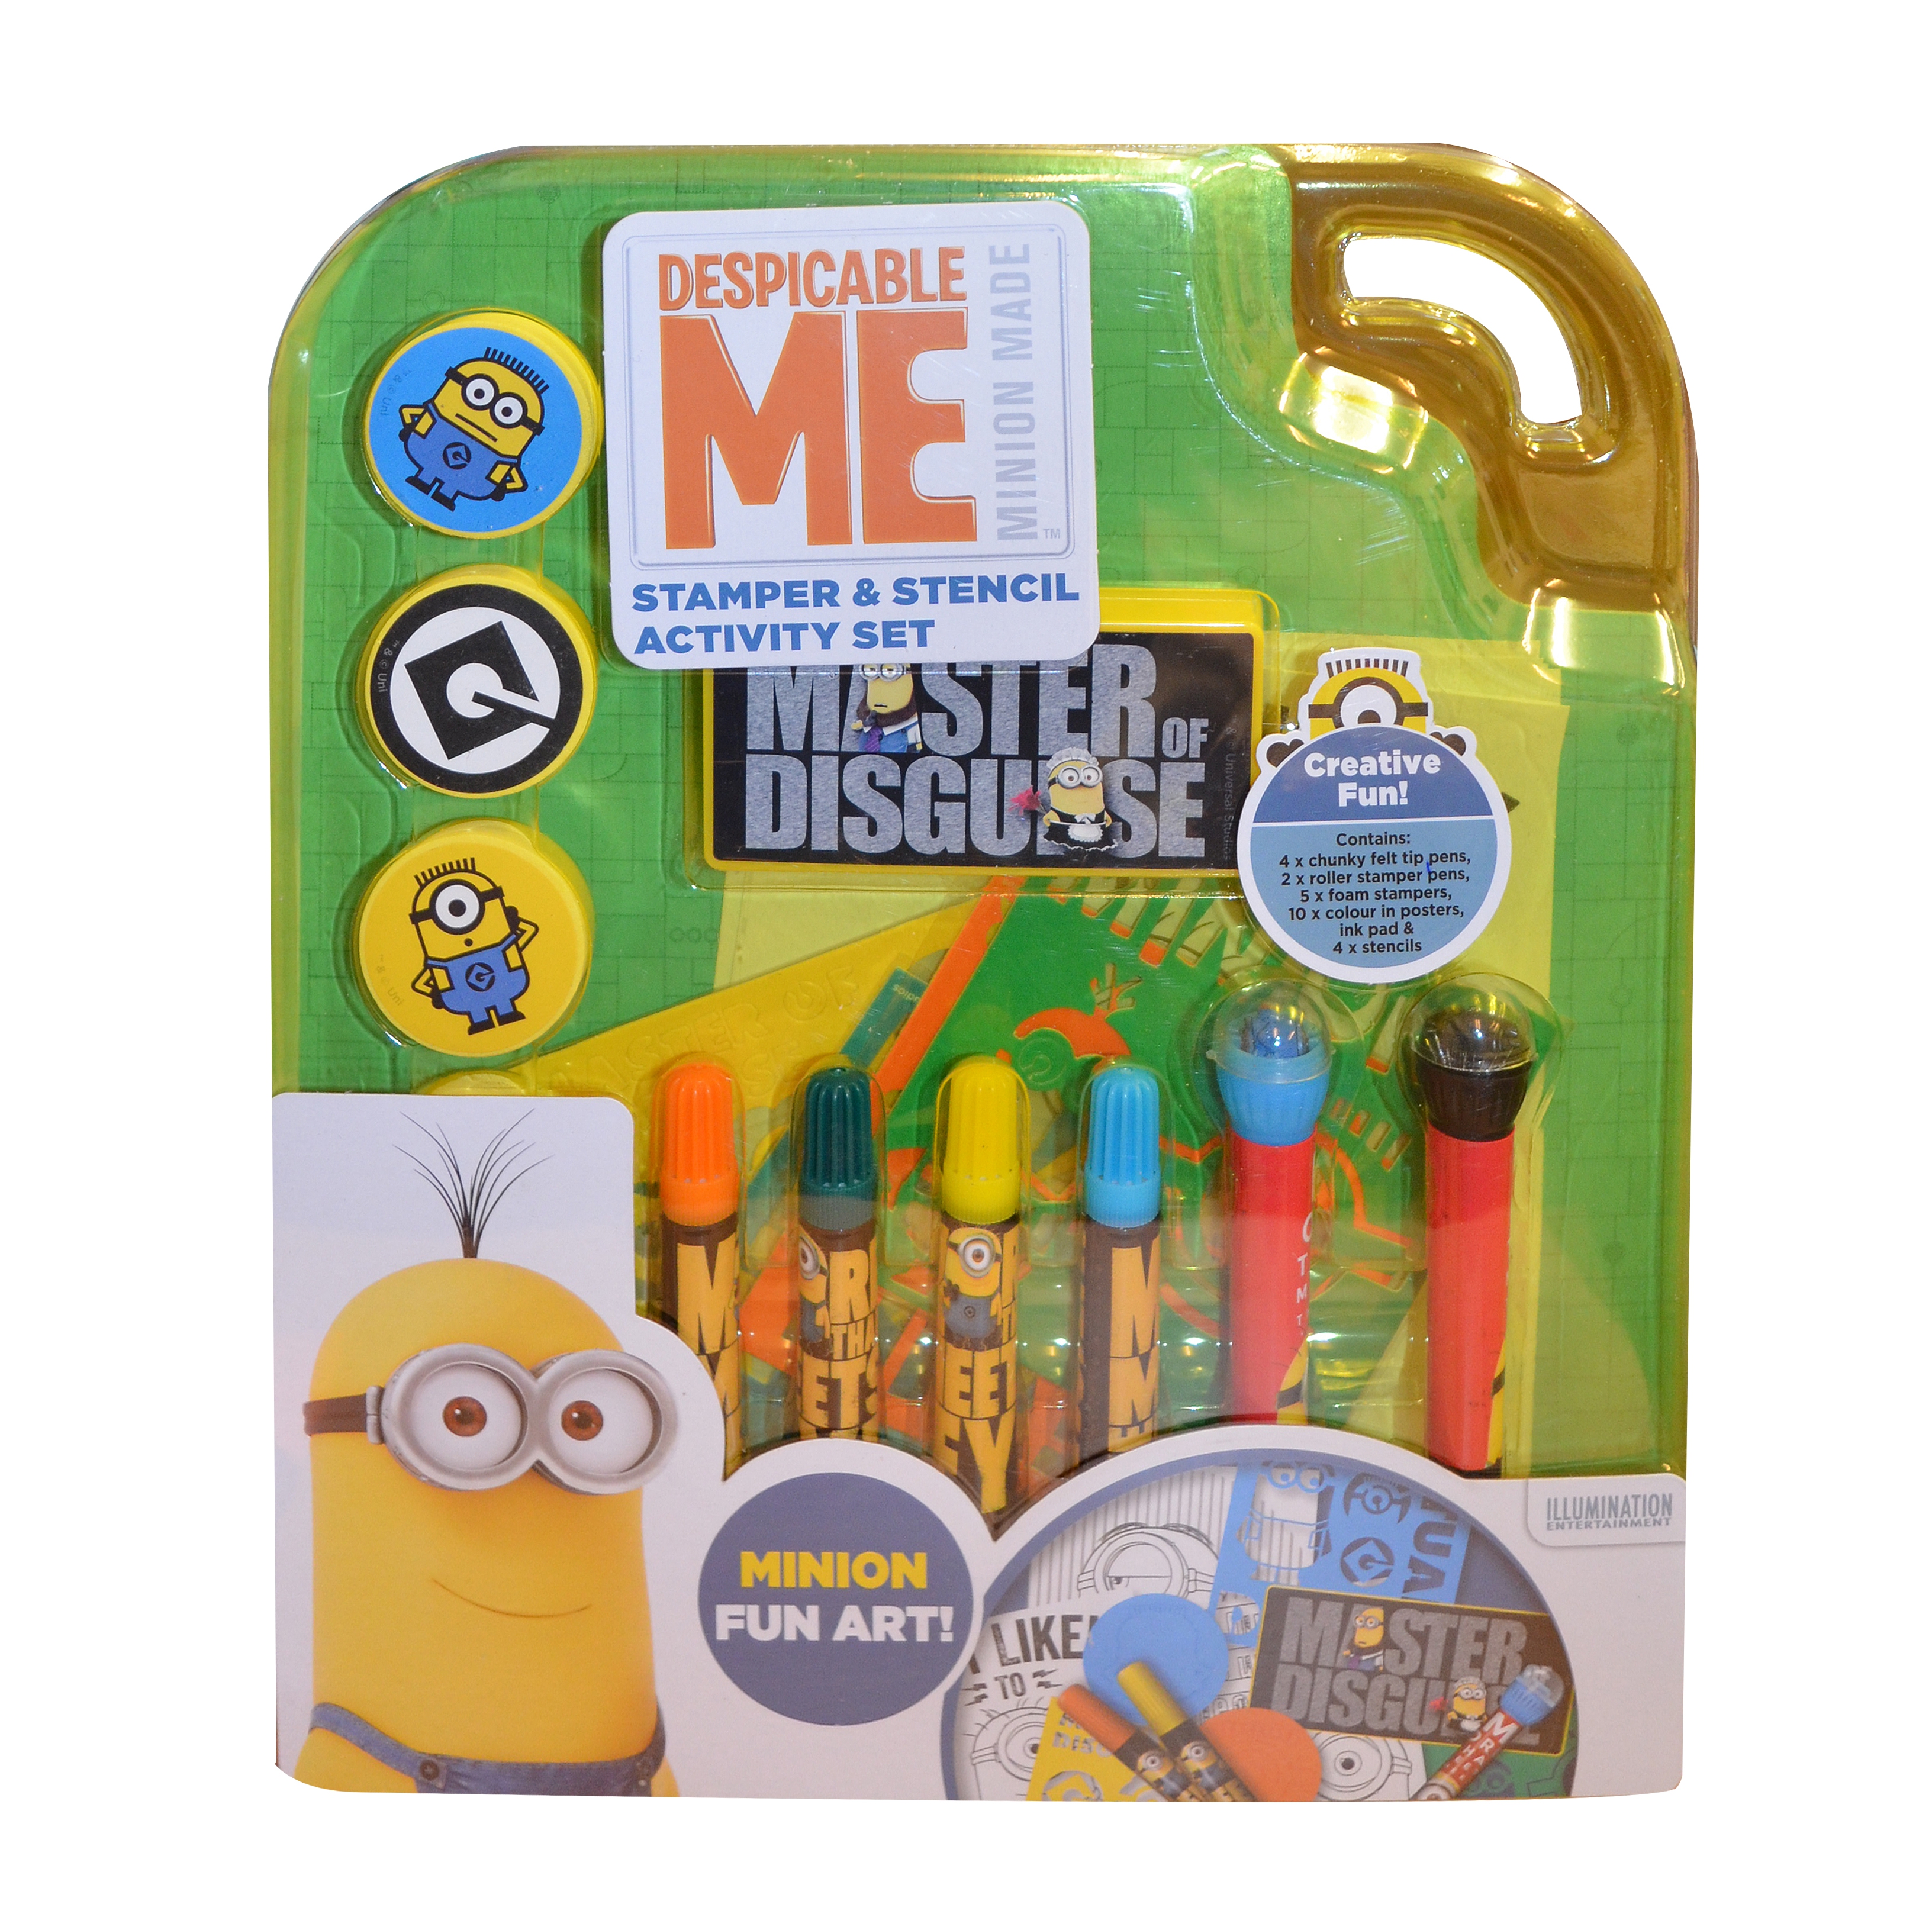 Despicable Me Minions 'Stamper & Stencil' Activity Set Stationery